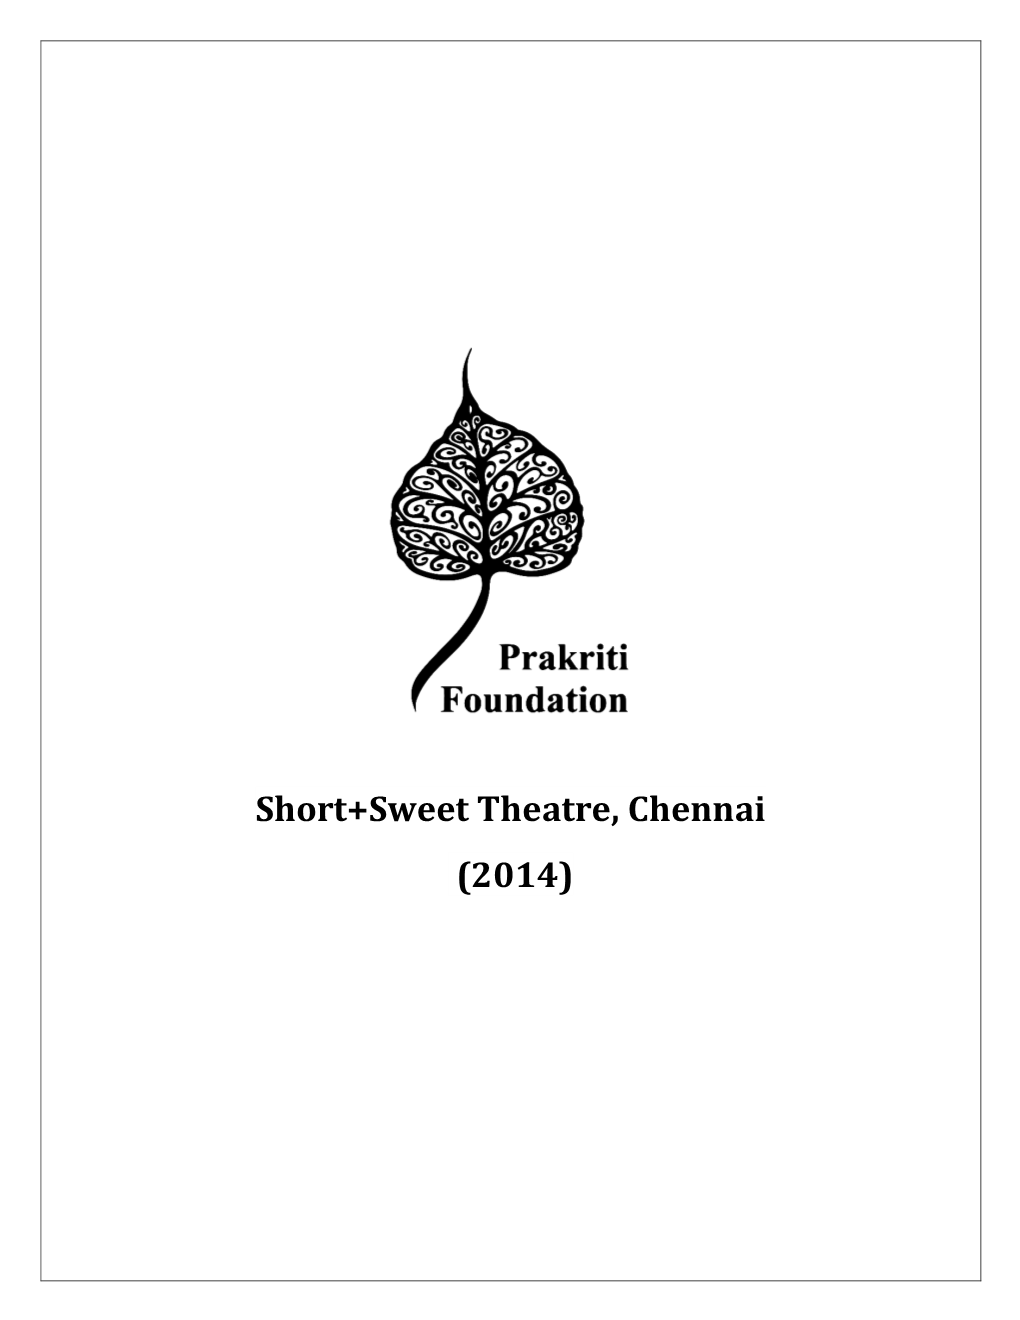 Short+Sweet Theatre, Chennai (2014) About Short+Sweet 2014